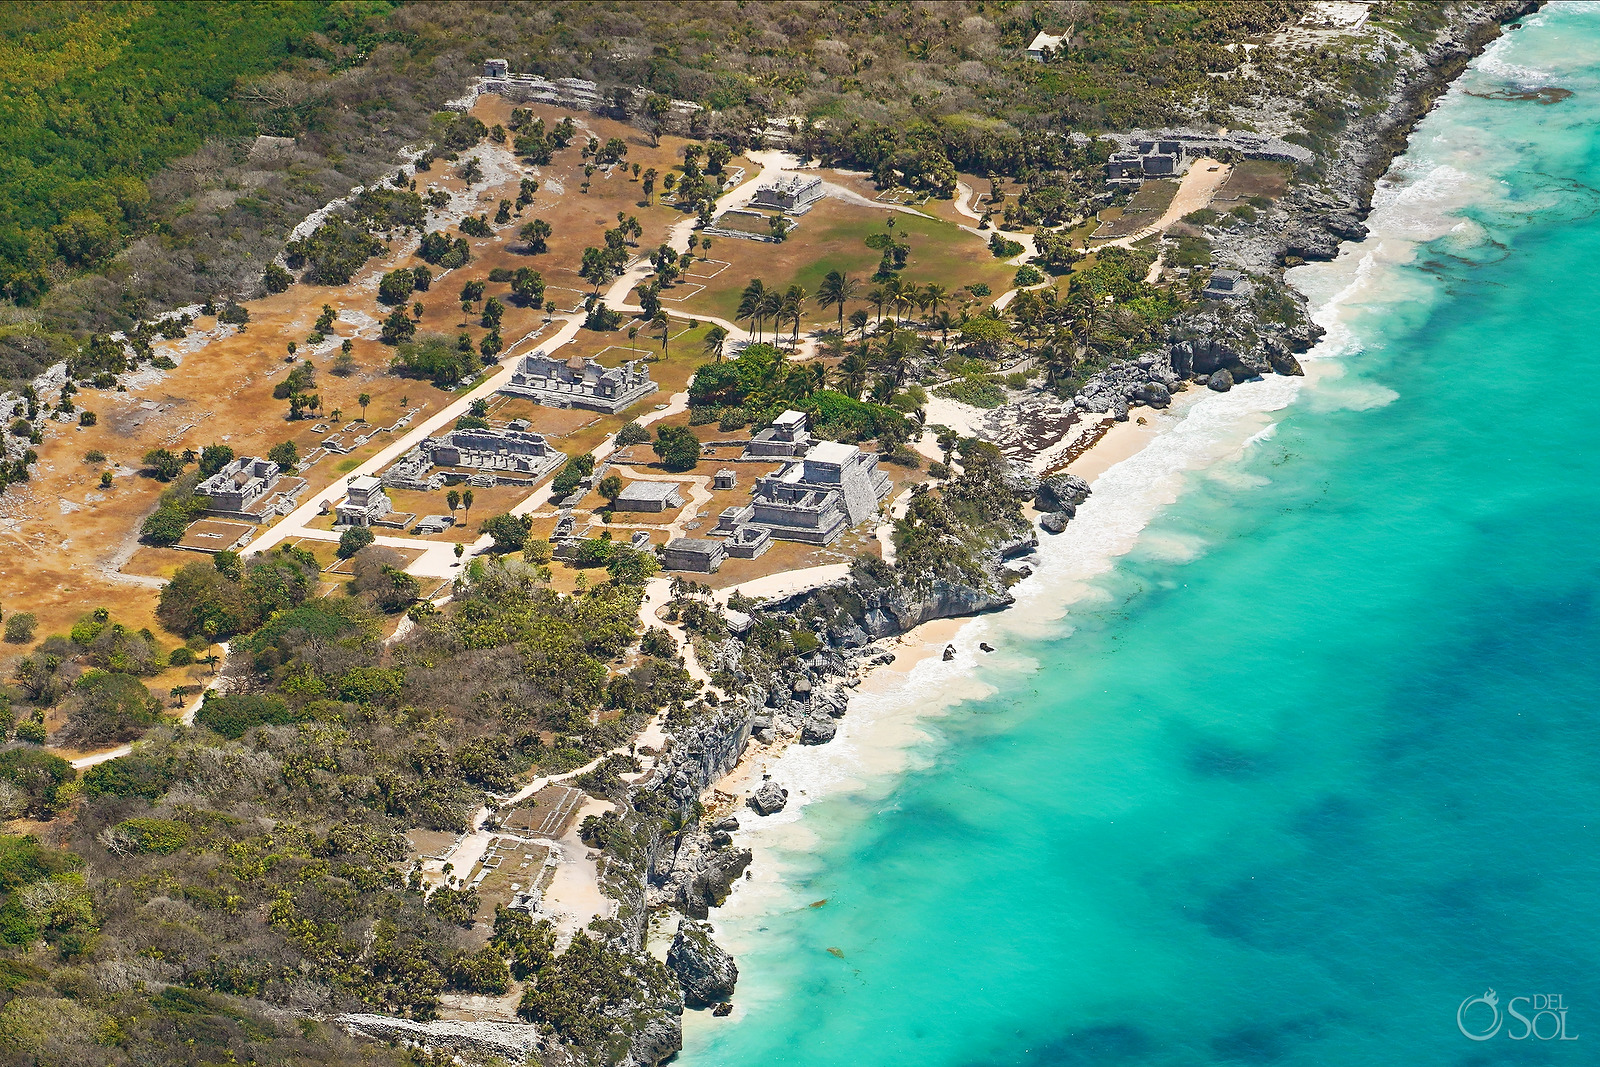 Del Sol Travels in the news Tulum Ruins 